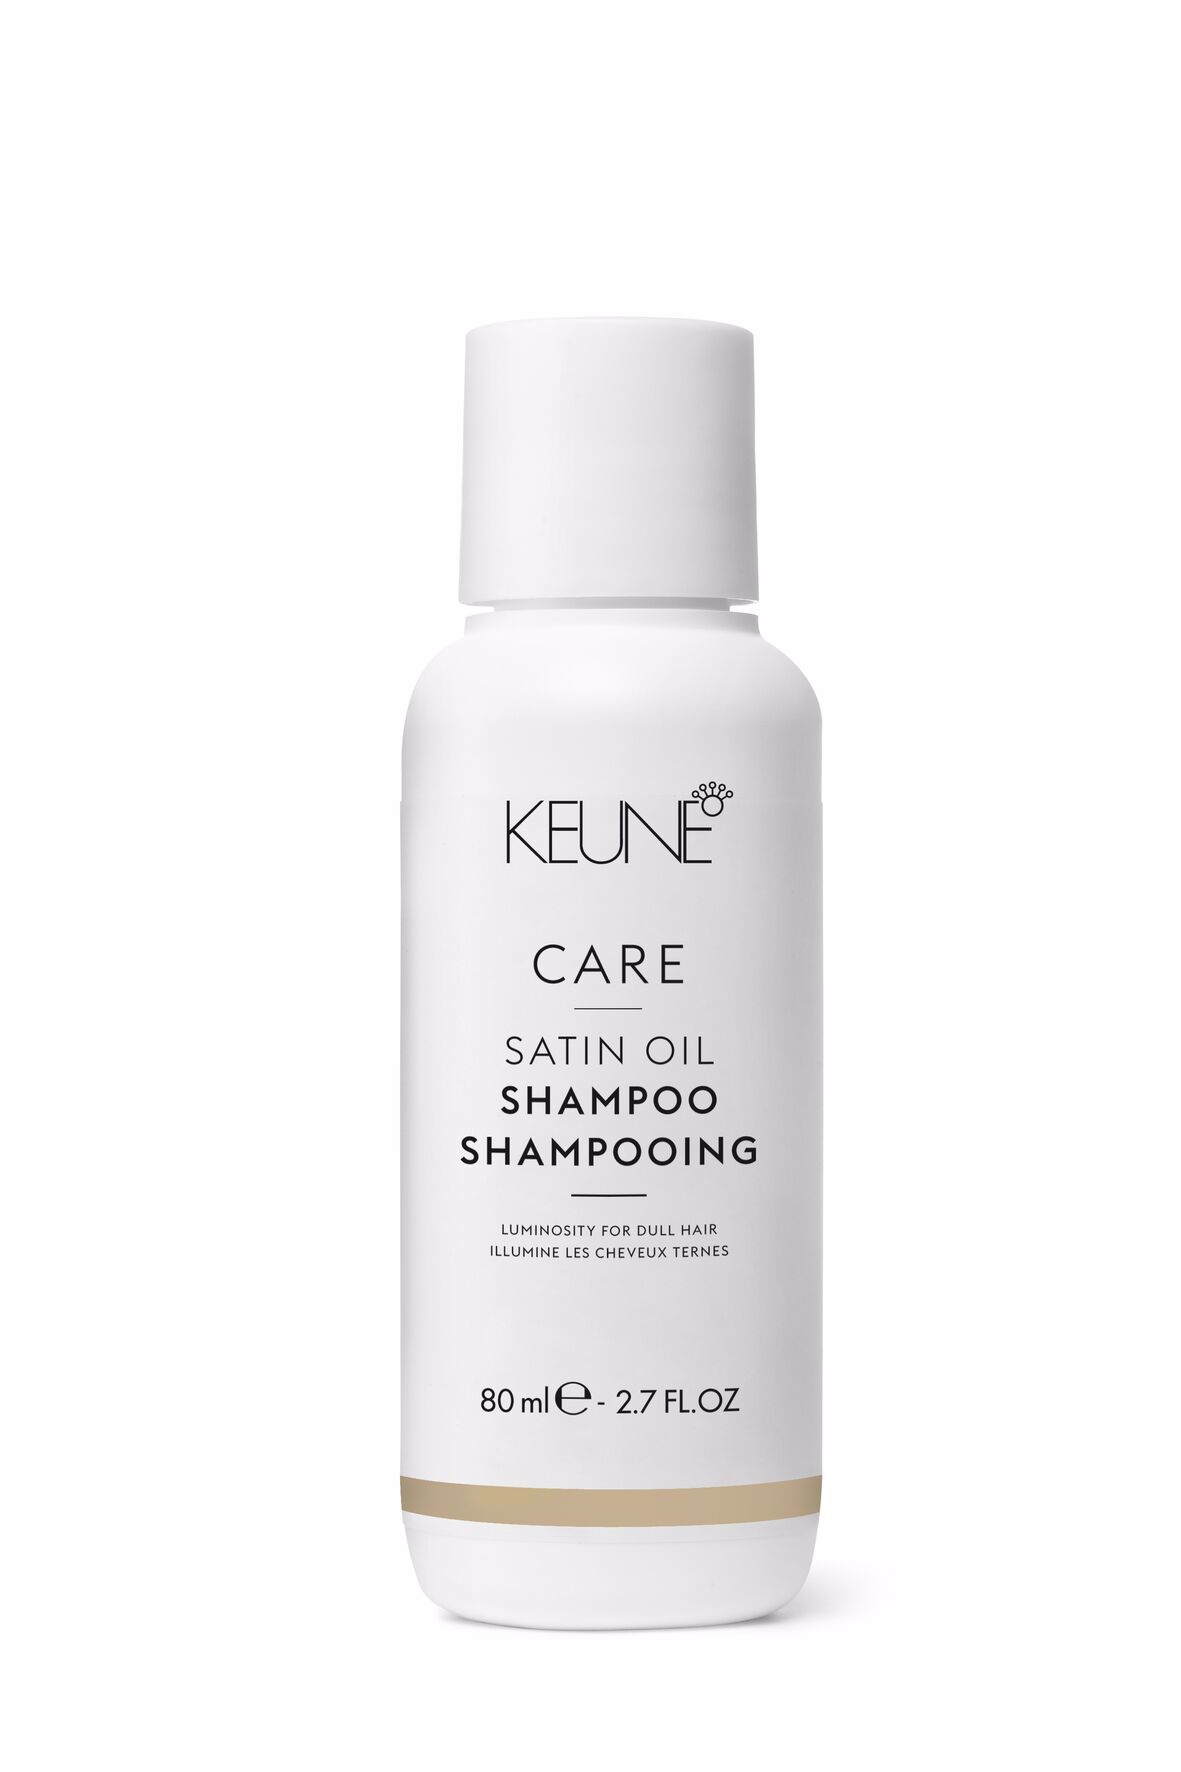 The ideal hair care product for dry and fluffy hair is Satin Oil Shampoo. With its innovative, lightweight formula, it leaves your hair fresh, healthy, and shiny. Available on keune.ch.